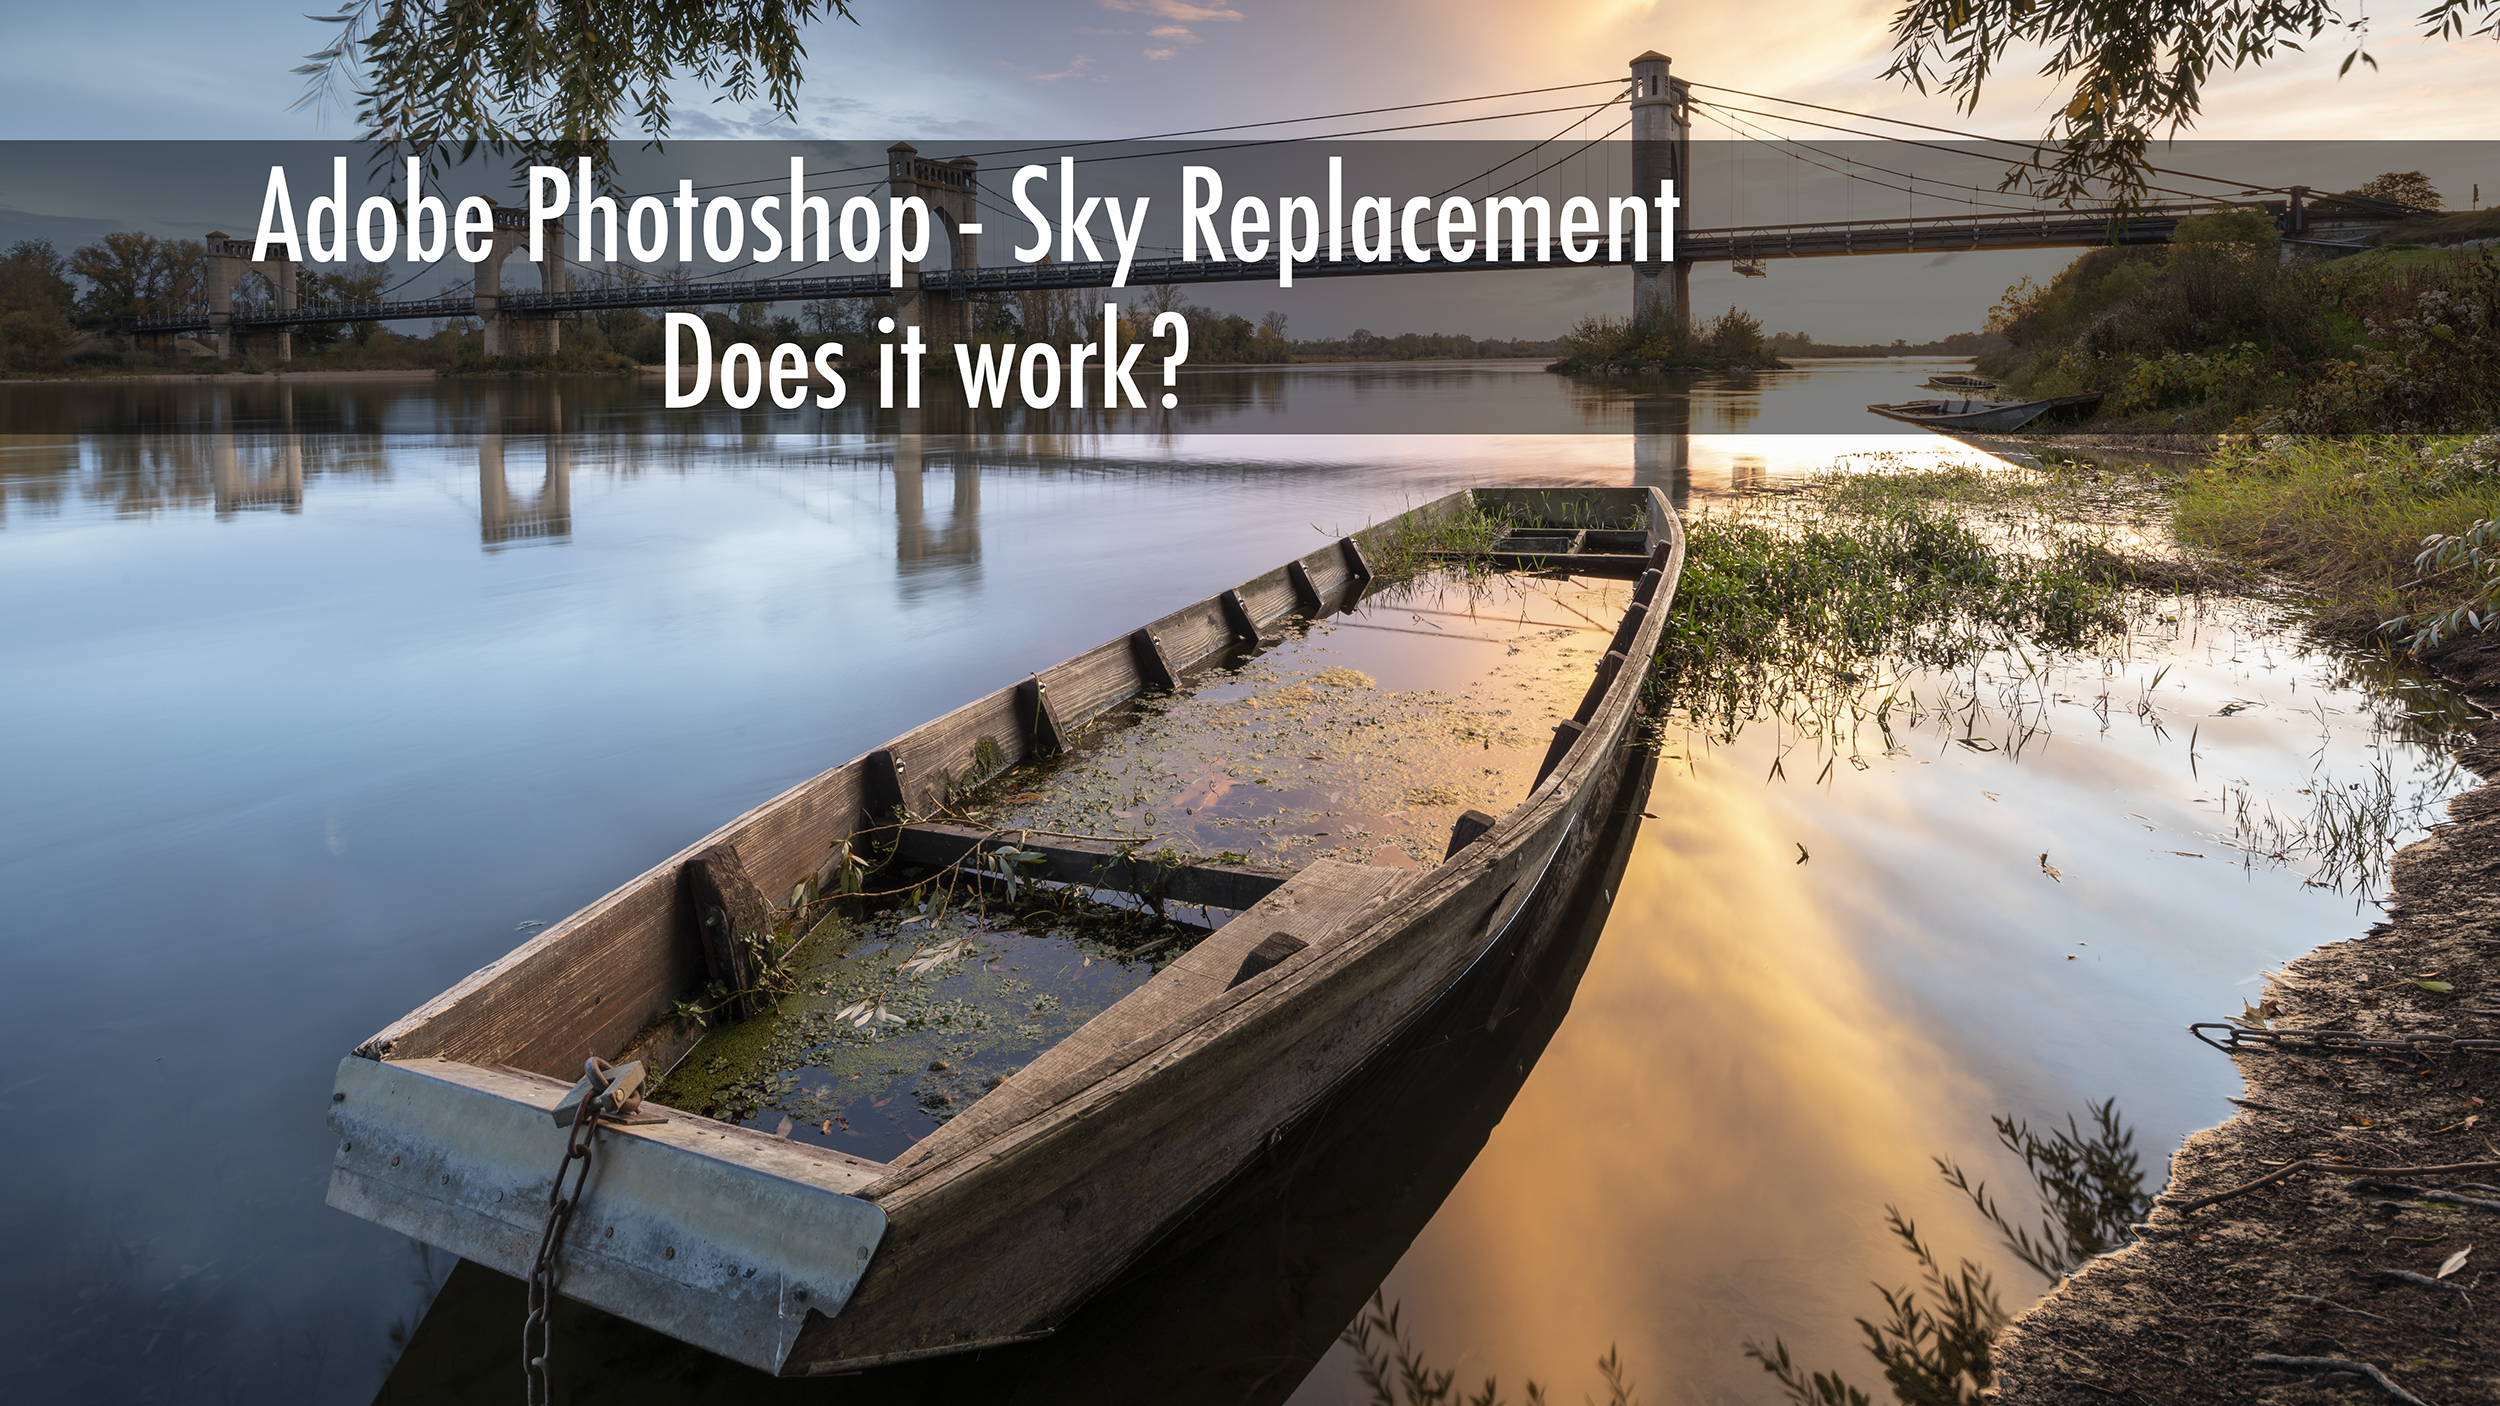 Adobe's sky replacement tool. Does it work?